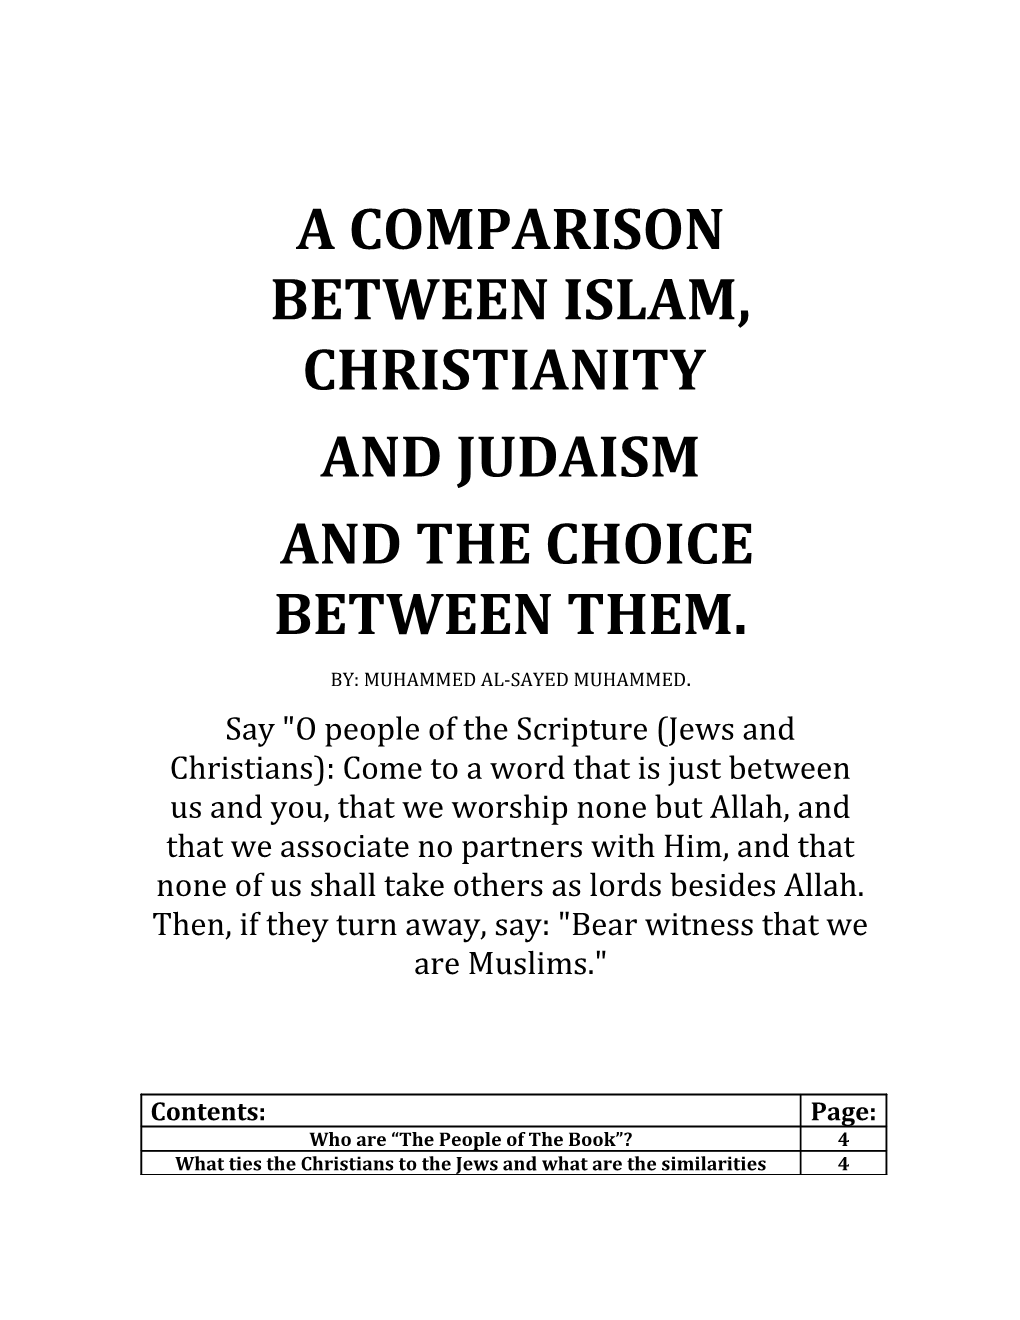 A Comparison Between Islam, Christianity and Judaism and the Choice Between Them